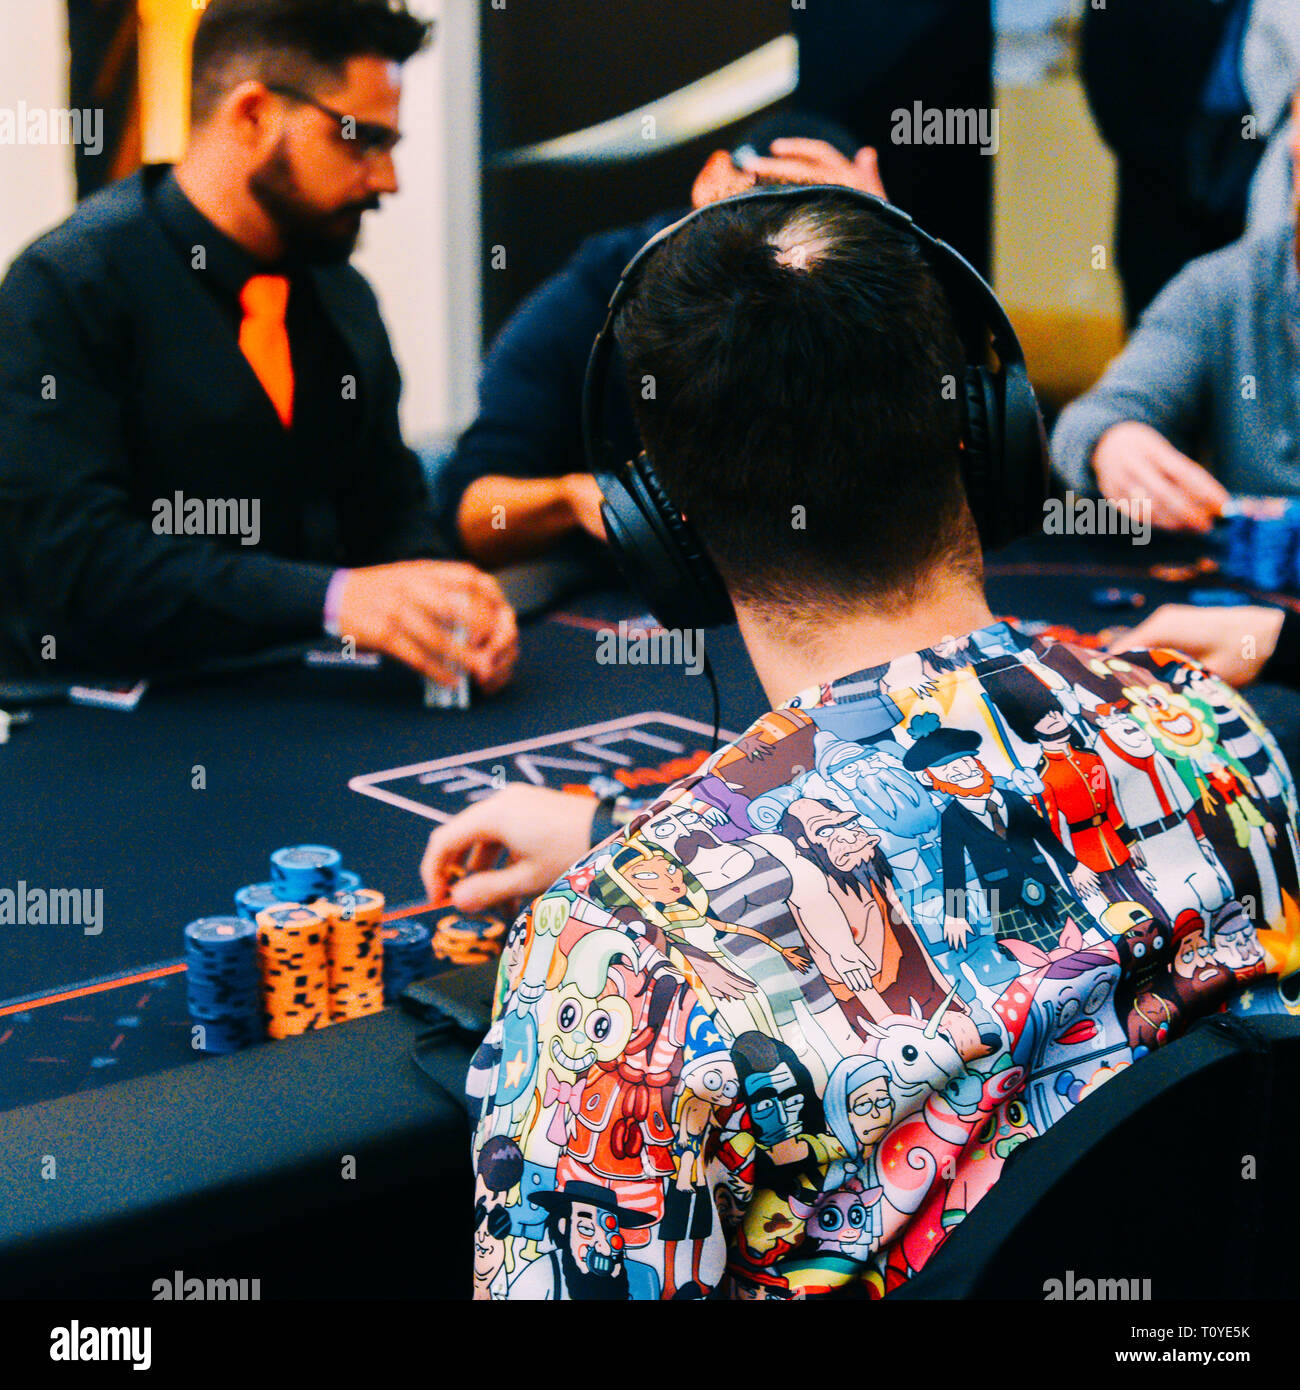 Rio de Janeiro, Brazil - March 21st, 2019: Poker Player with a colourful shirt at the Main Event of the PartyPoker LIVE MILLIONS South America 2019 occuring at the luxurious Copacabana Palace Belmond Hotel in Rio de Janeiro, Brazil from March 15th through March 24th, 2019. Credit: Alexandre Rotenberg/Alamy Live News Stock Photo